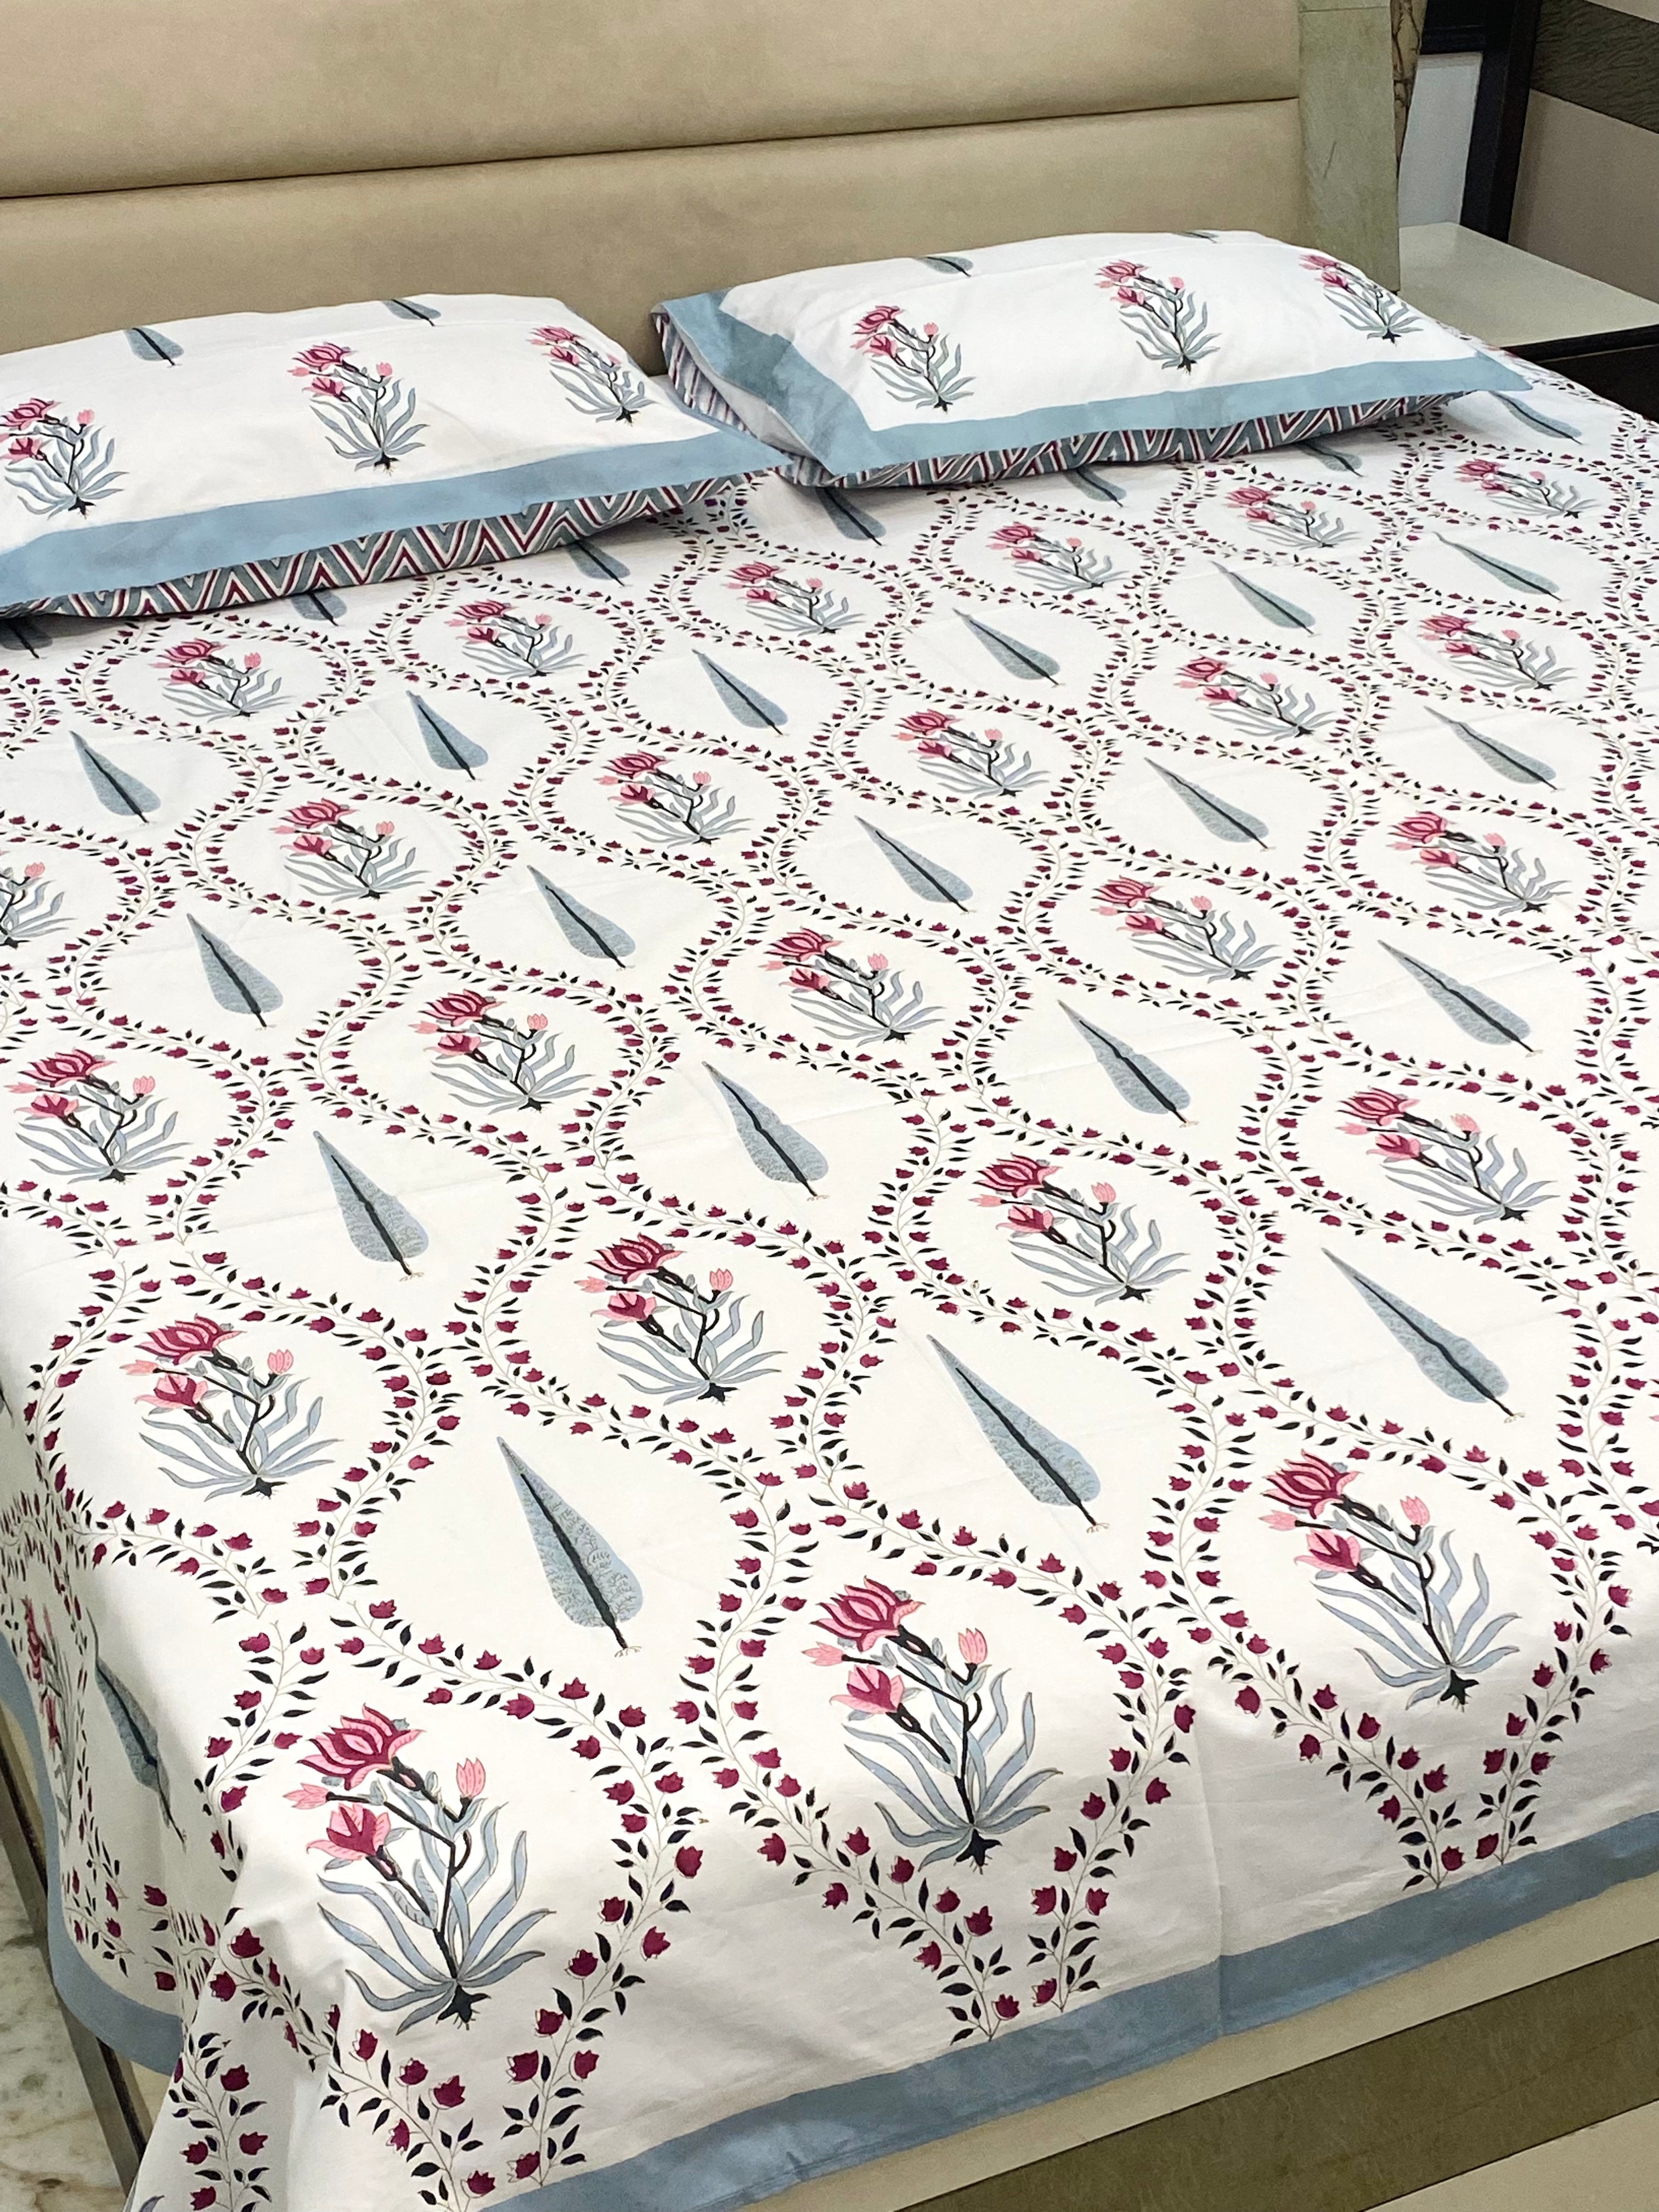 Blockprint Cotton Bedsheet -Double Size (90 * 108 inches)